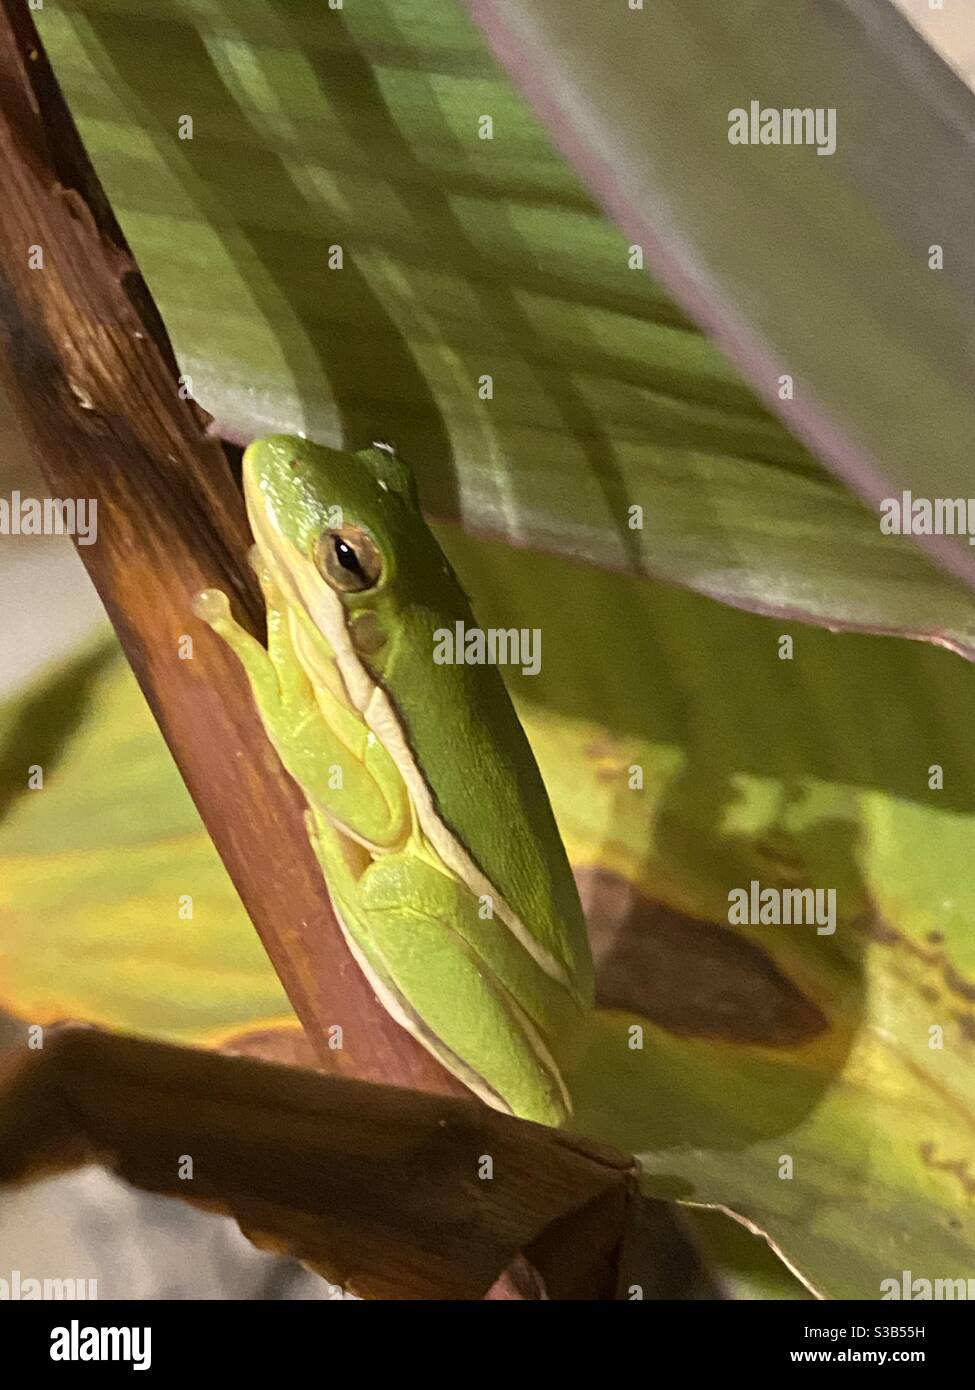 Tiny frog on a plant Stock Photo